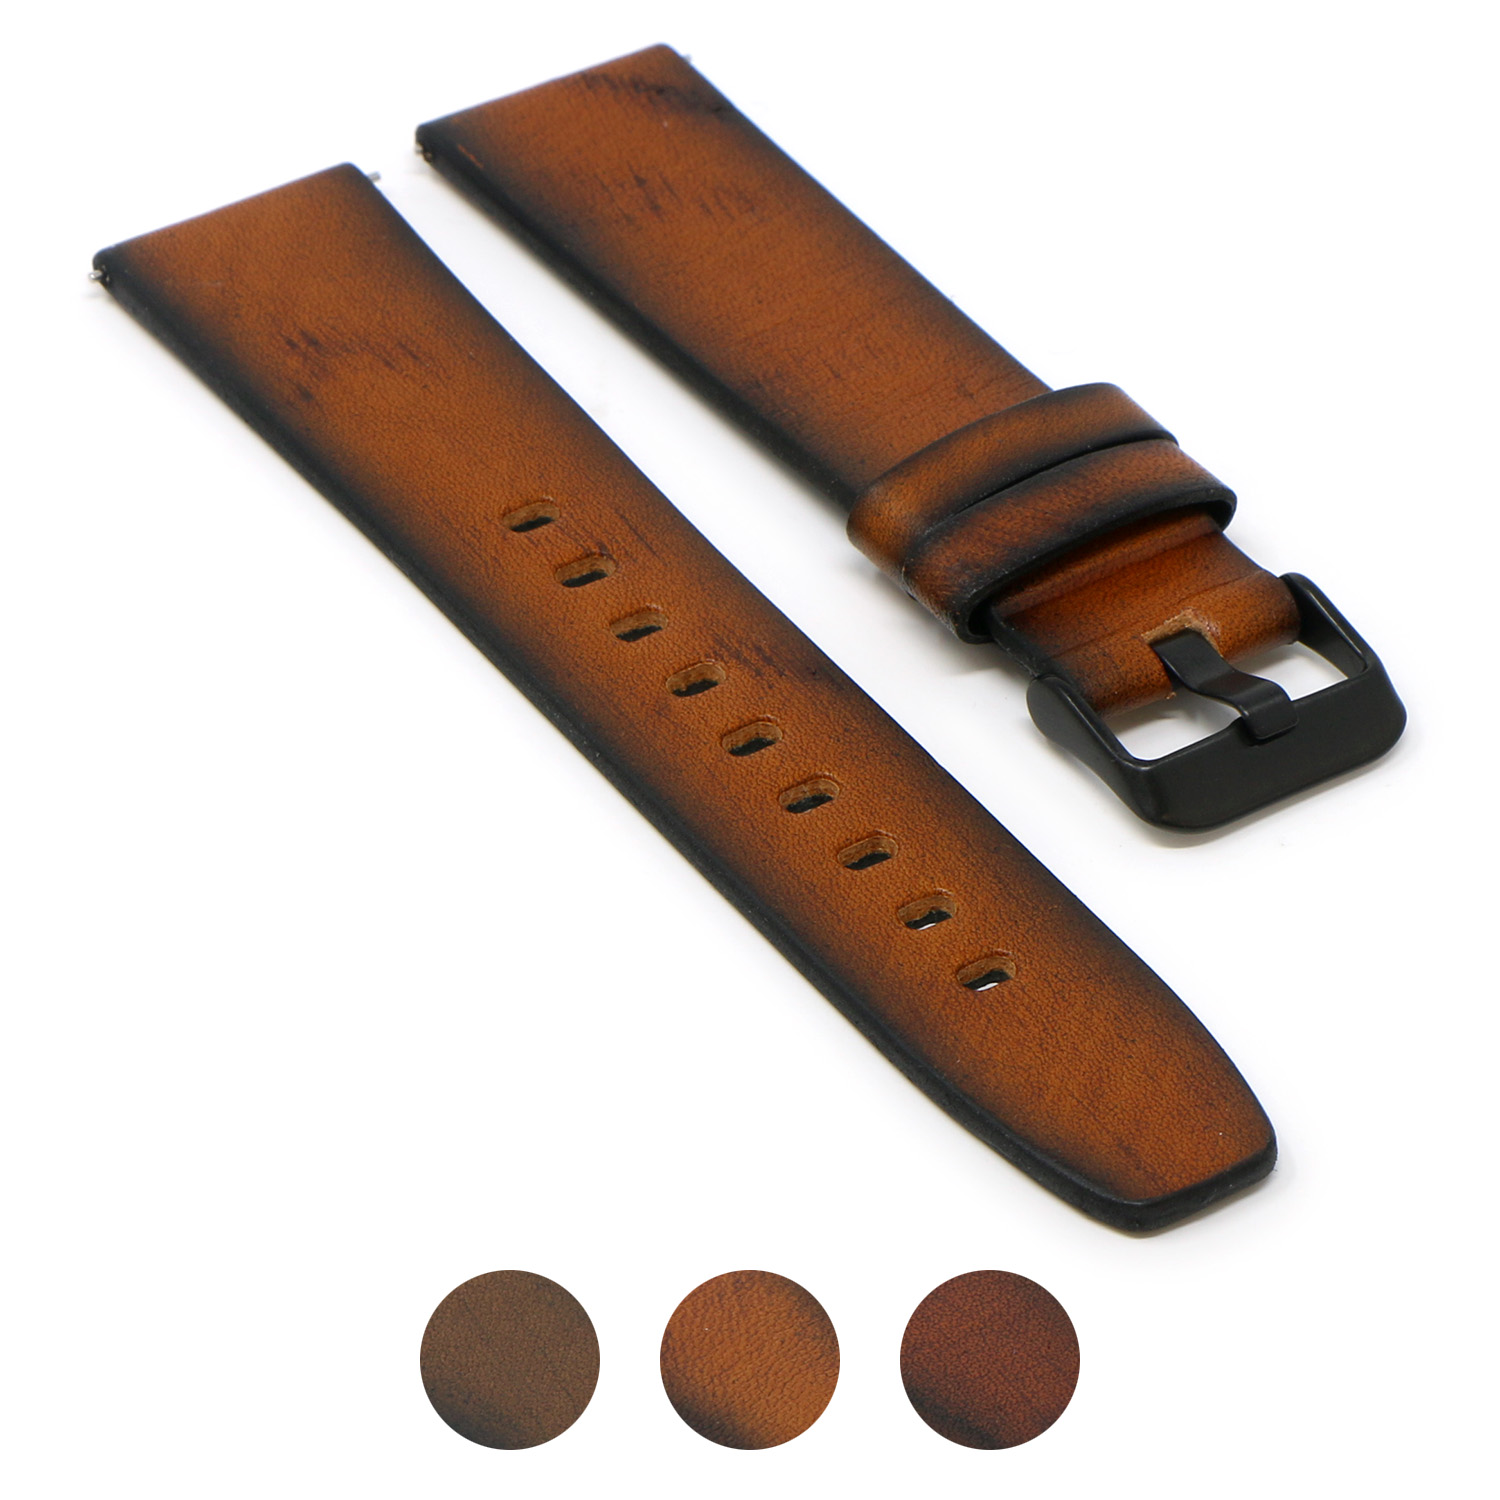 versa 2 leather watch bands